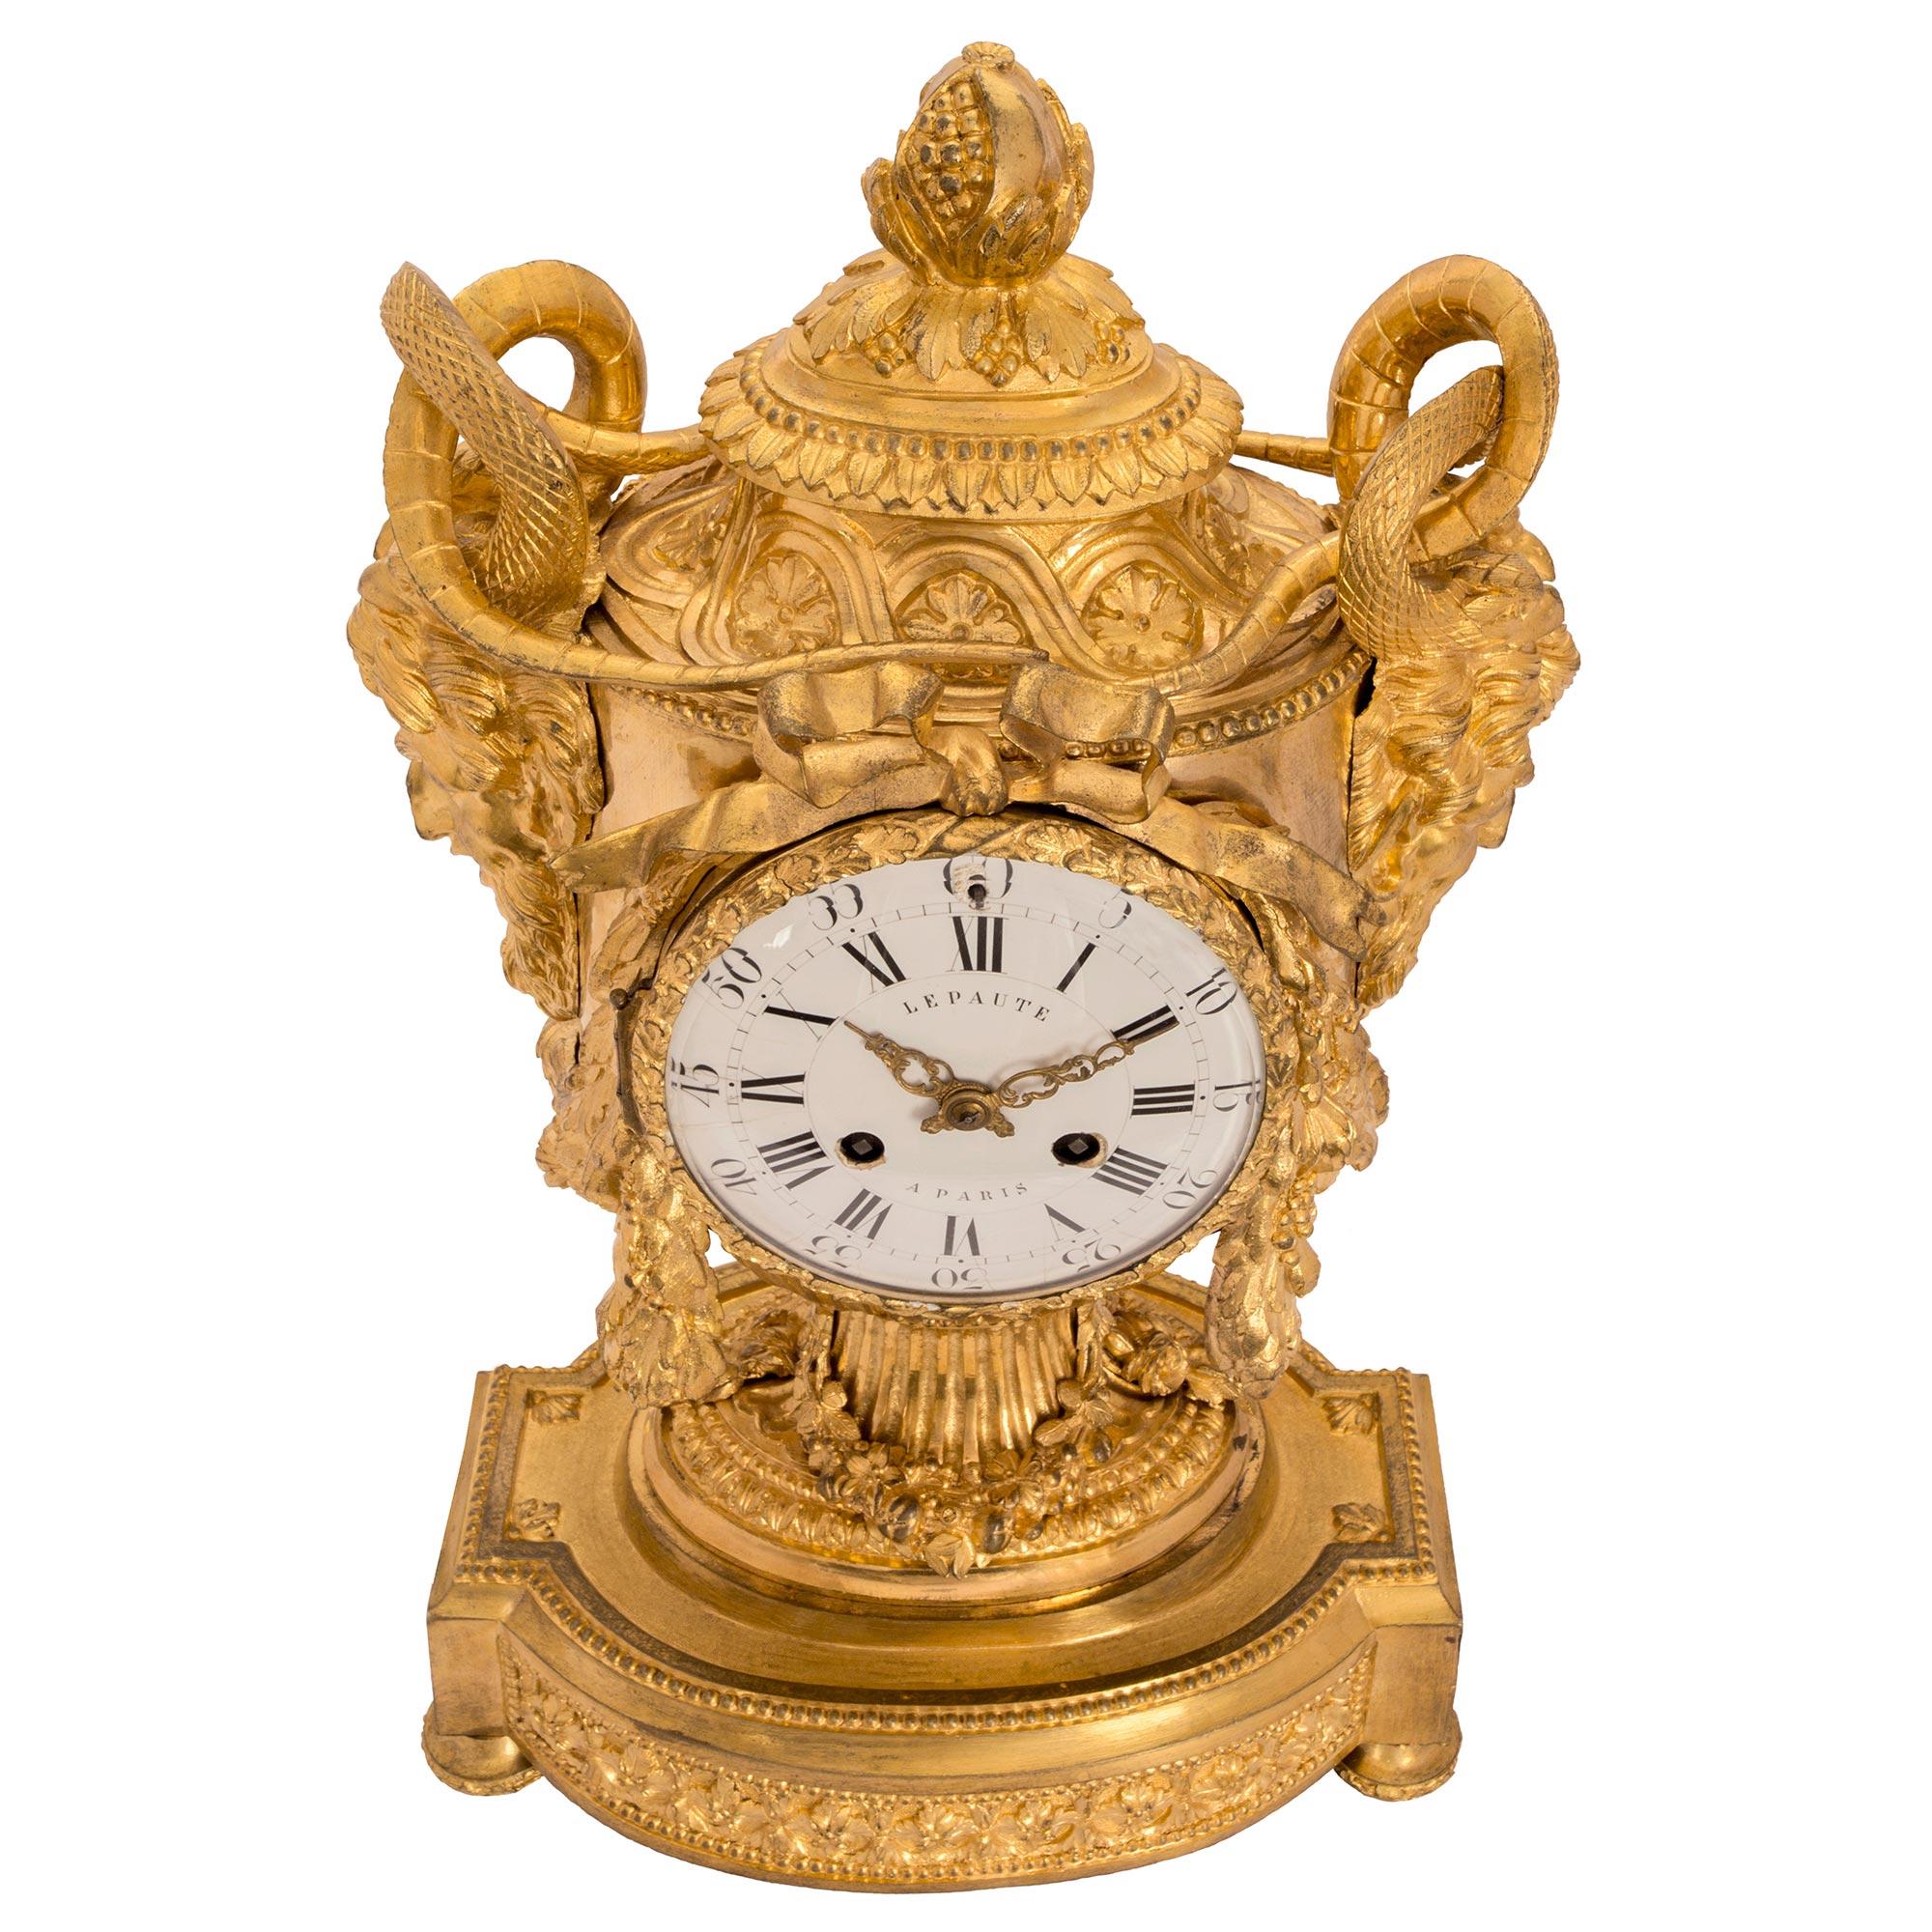 An extremely high quality French mid 19th century Louis XVI st. signed 'Lepaute, Paris' ormolu clock. The clock with a superb chasing throughout has all of its original gilt. Raised by an oval back base and topie shaped legs has rosettes and a